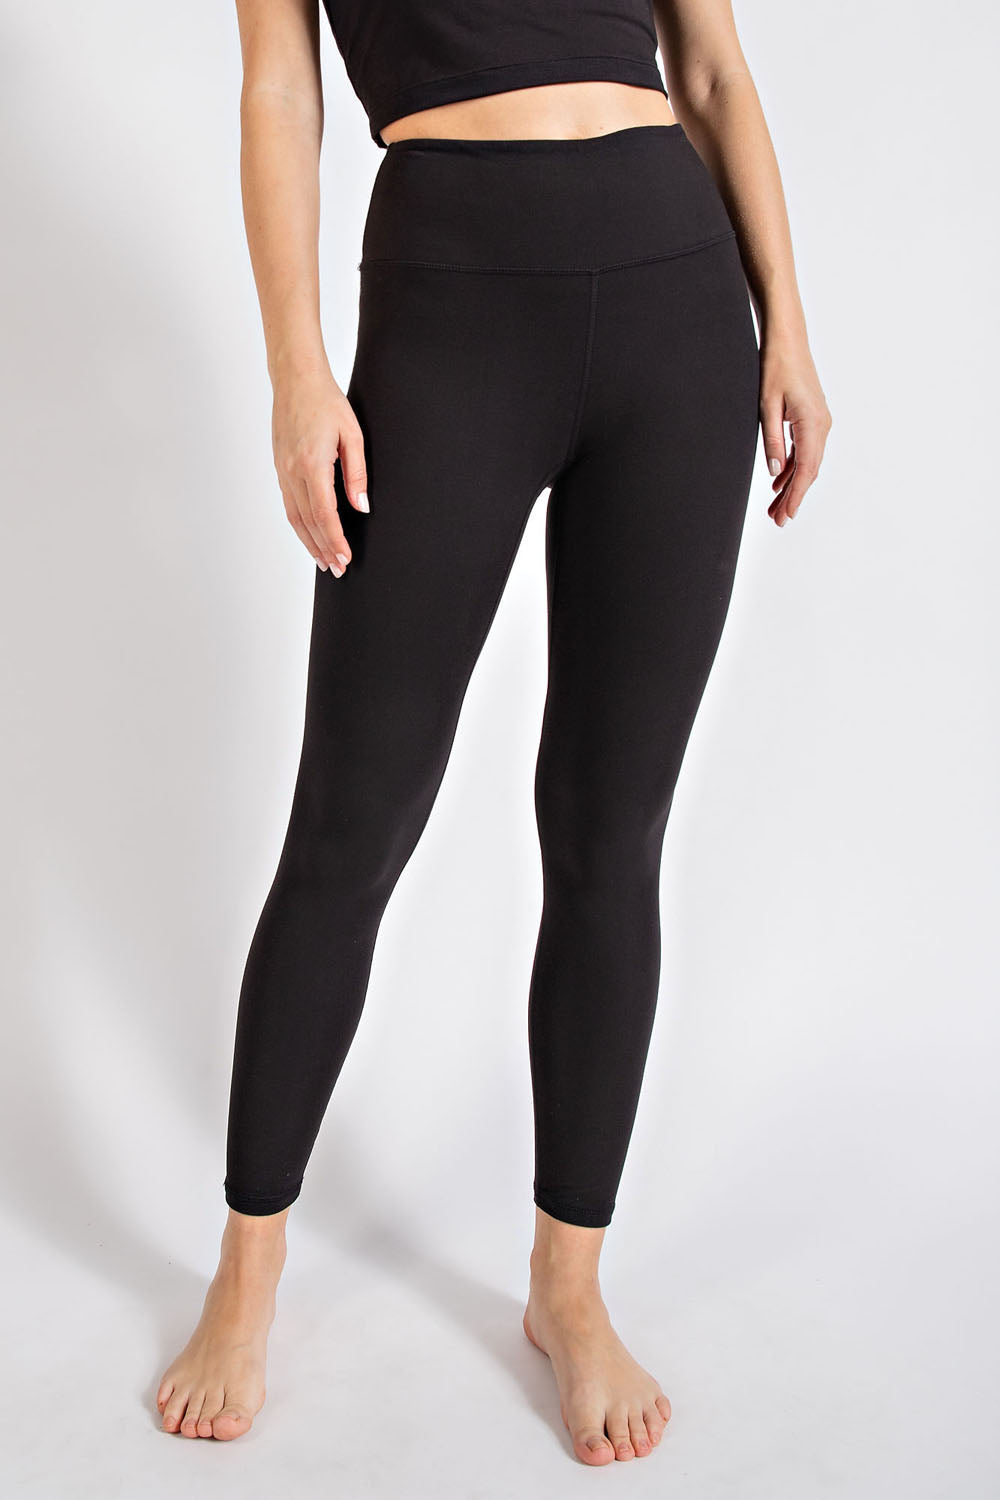 Buttery Soft Leggings with Pockets Black – Lush Moda Boutique